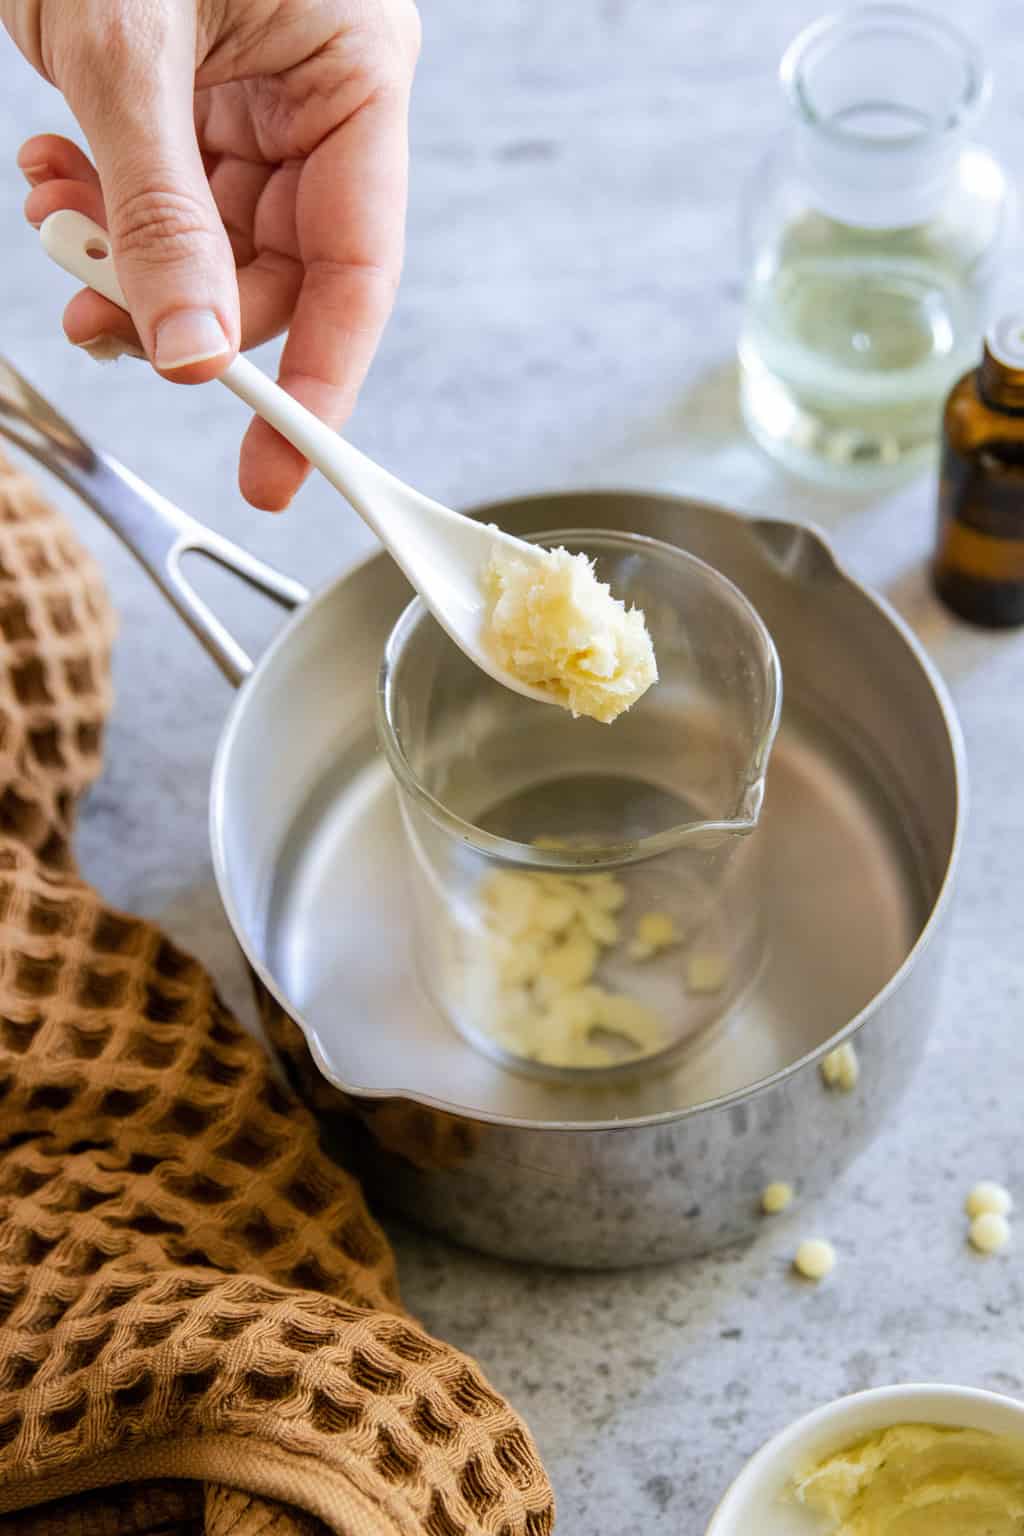 How to Make Lip Balm with Olive Oil